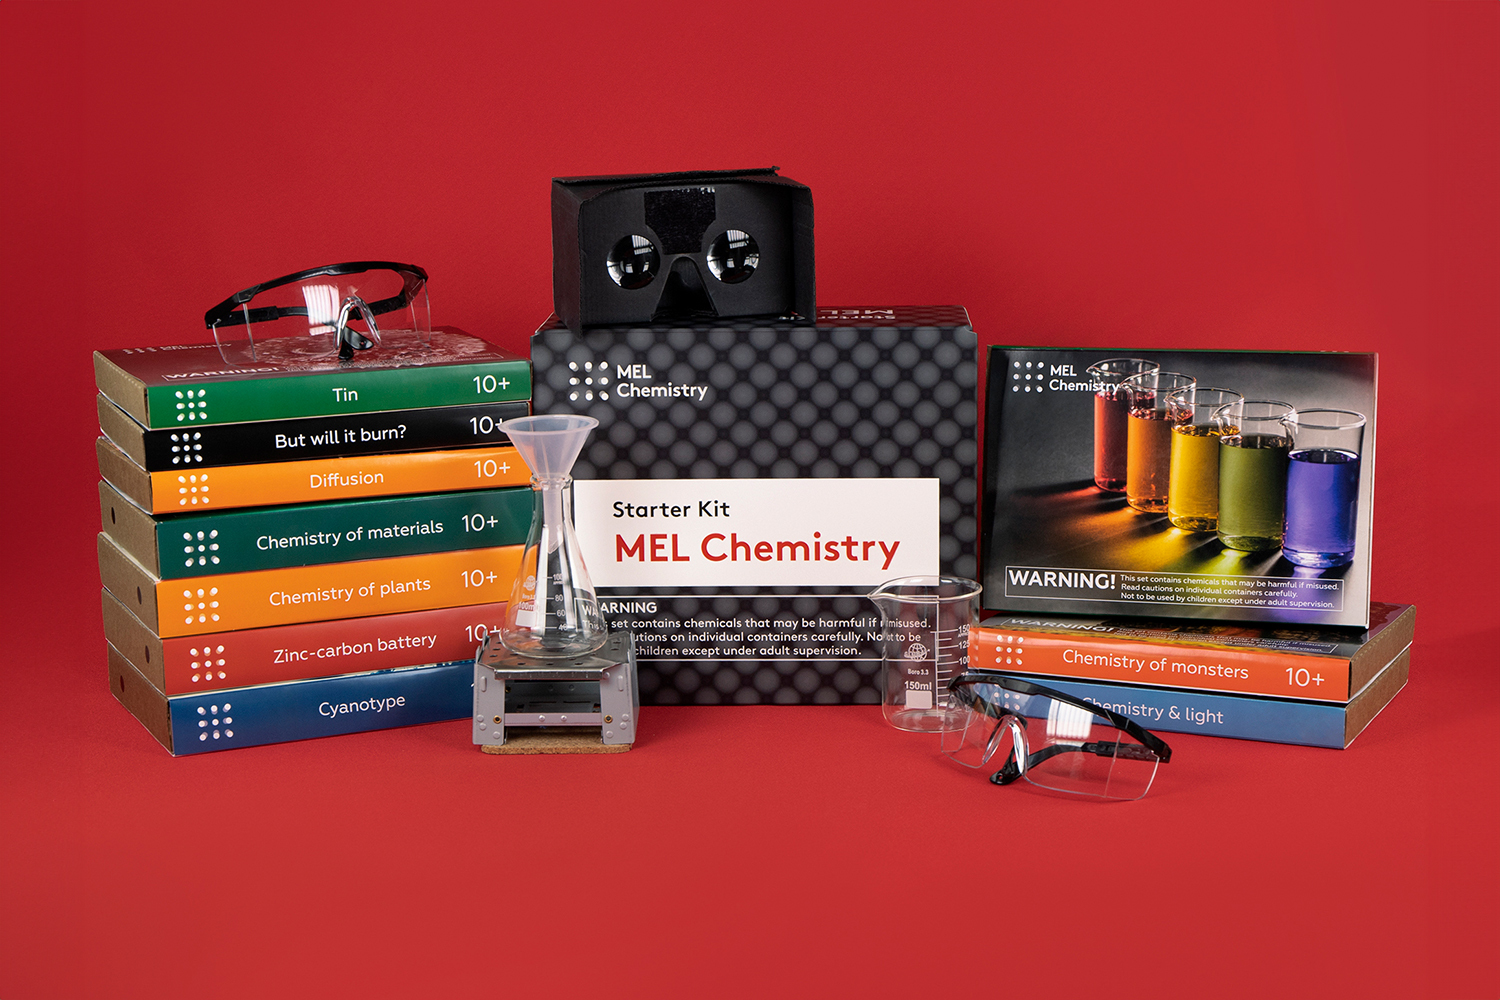 An image showing a variety of STEM science kits for kids, perfect for hands-on learning and exploration.